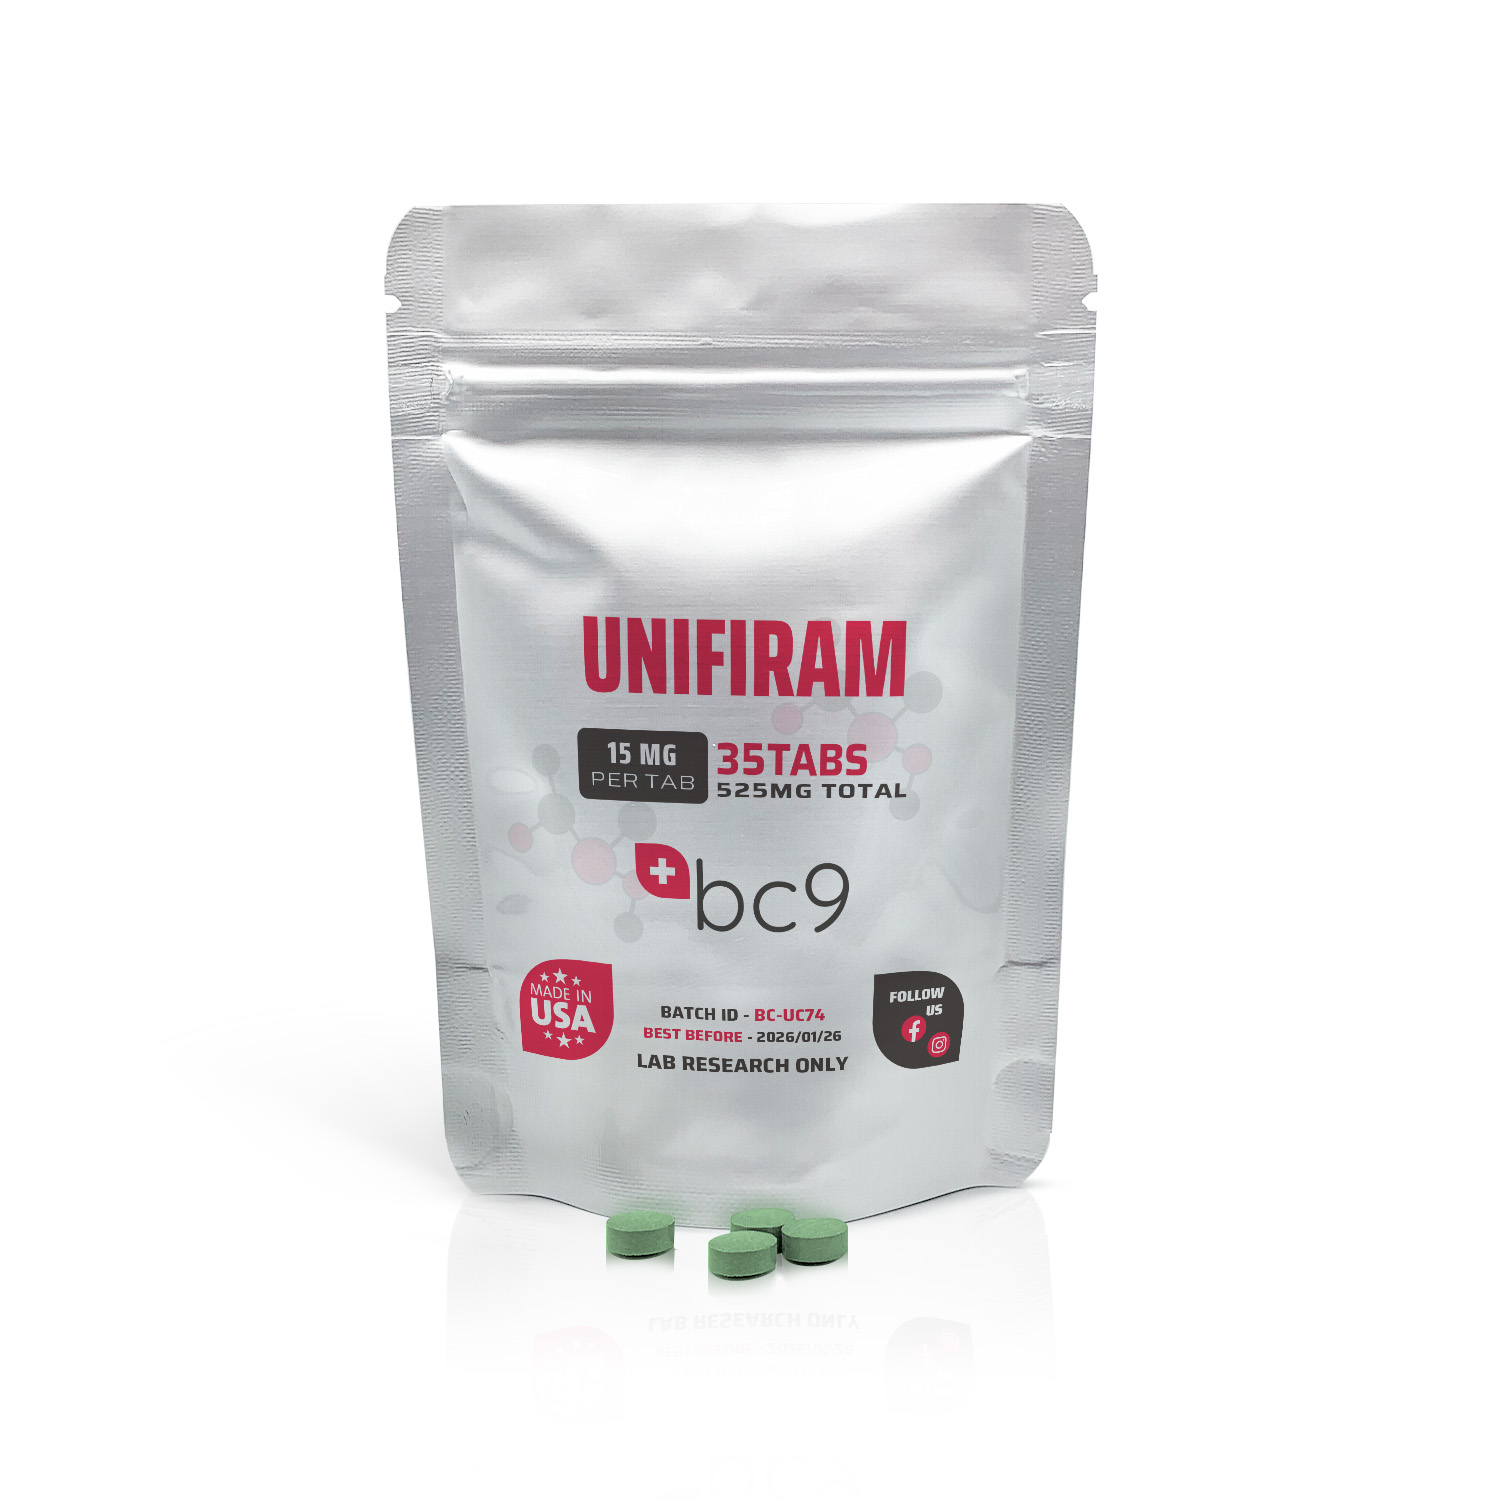 Unifiram Tablets For Sale | Fast Shipping | BC9.org